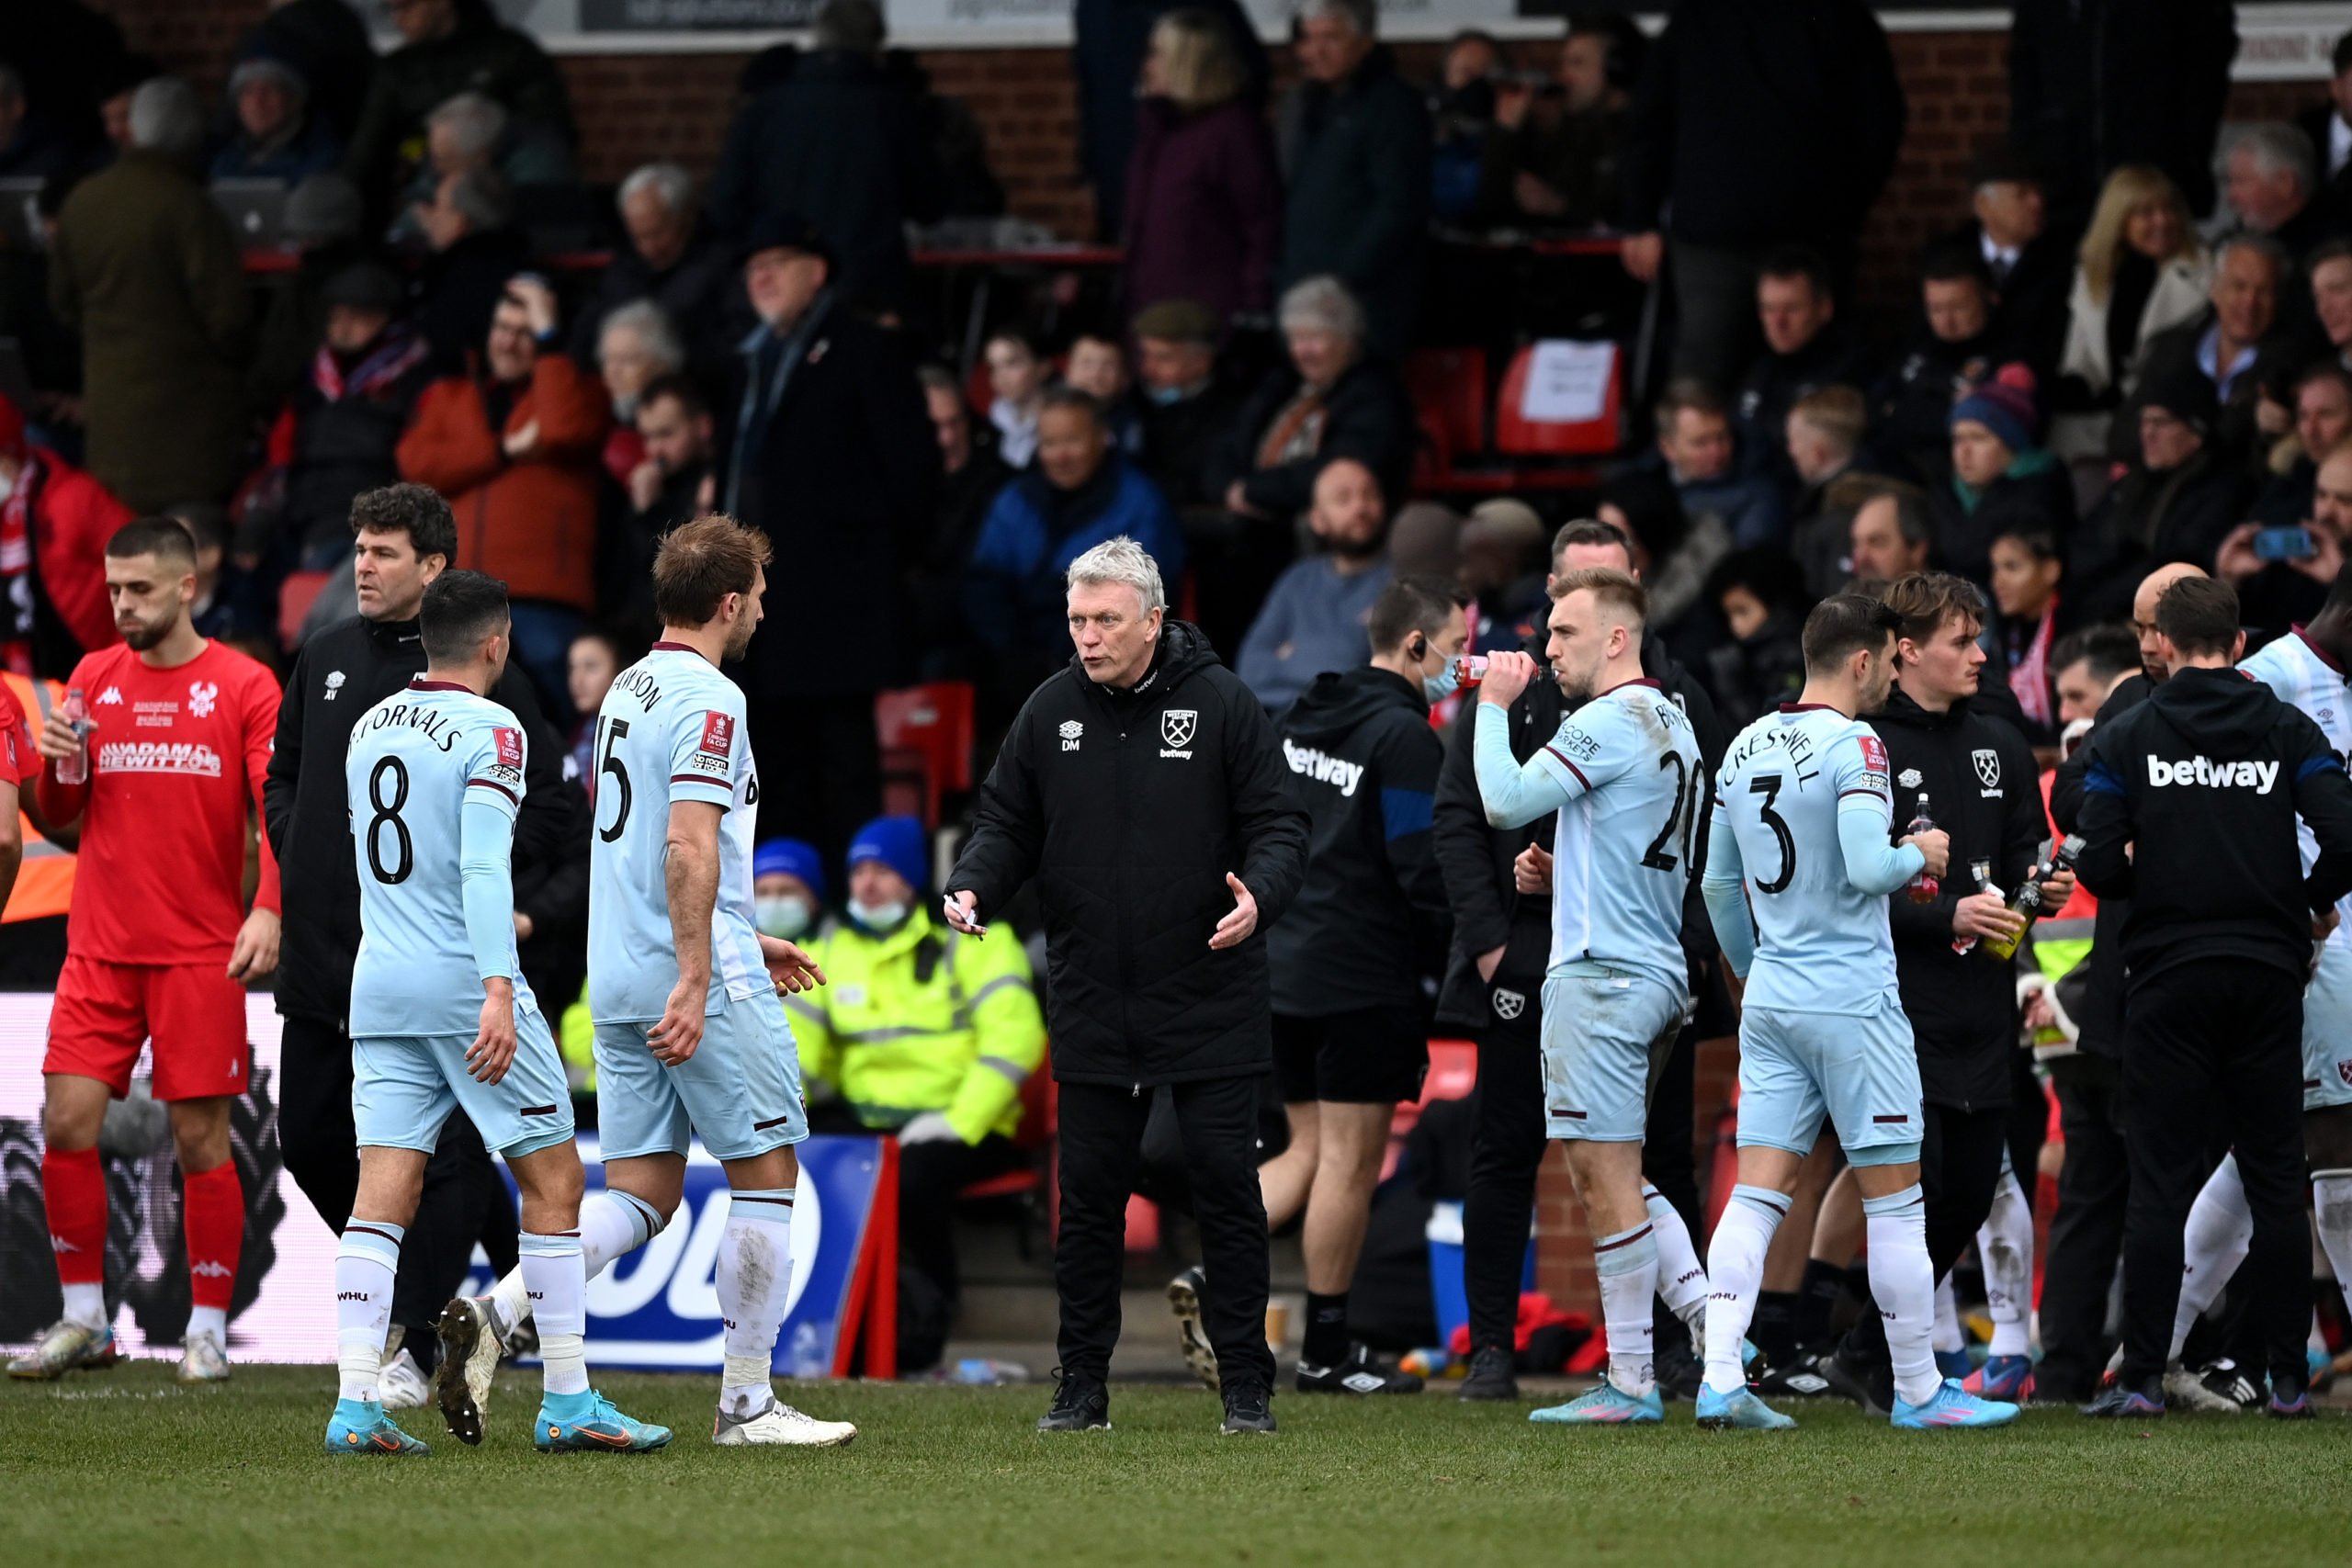 David Moyes shares what he told the West Ham players at half-time vs Kidderminster